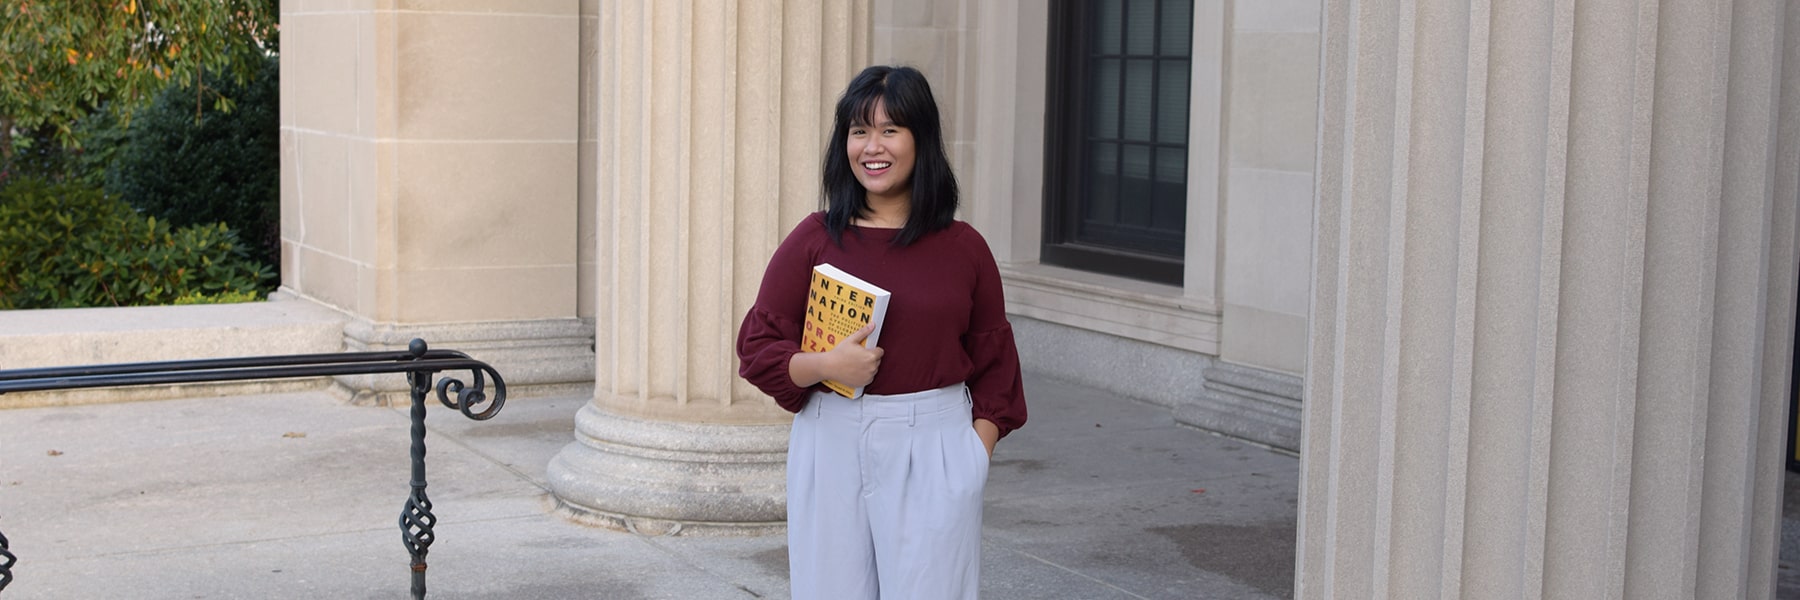 Graduate student in Conflict Resolution holds book on steps of a courthouse.